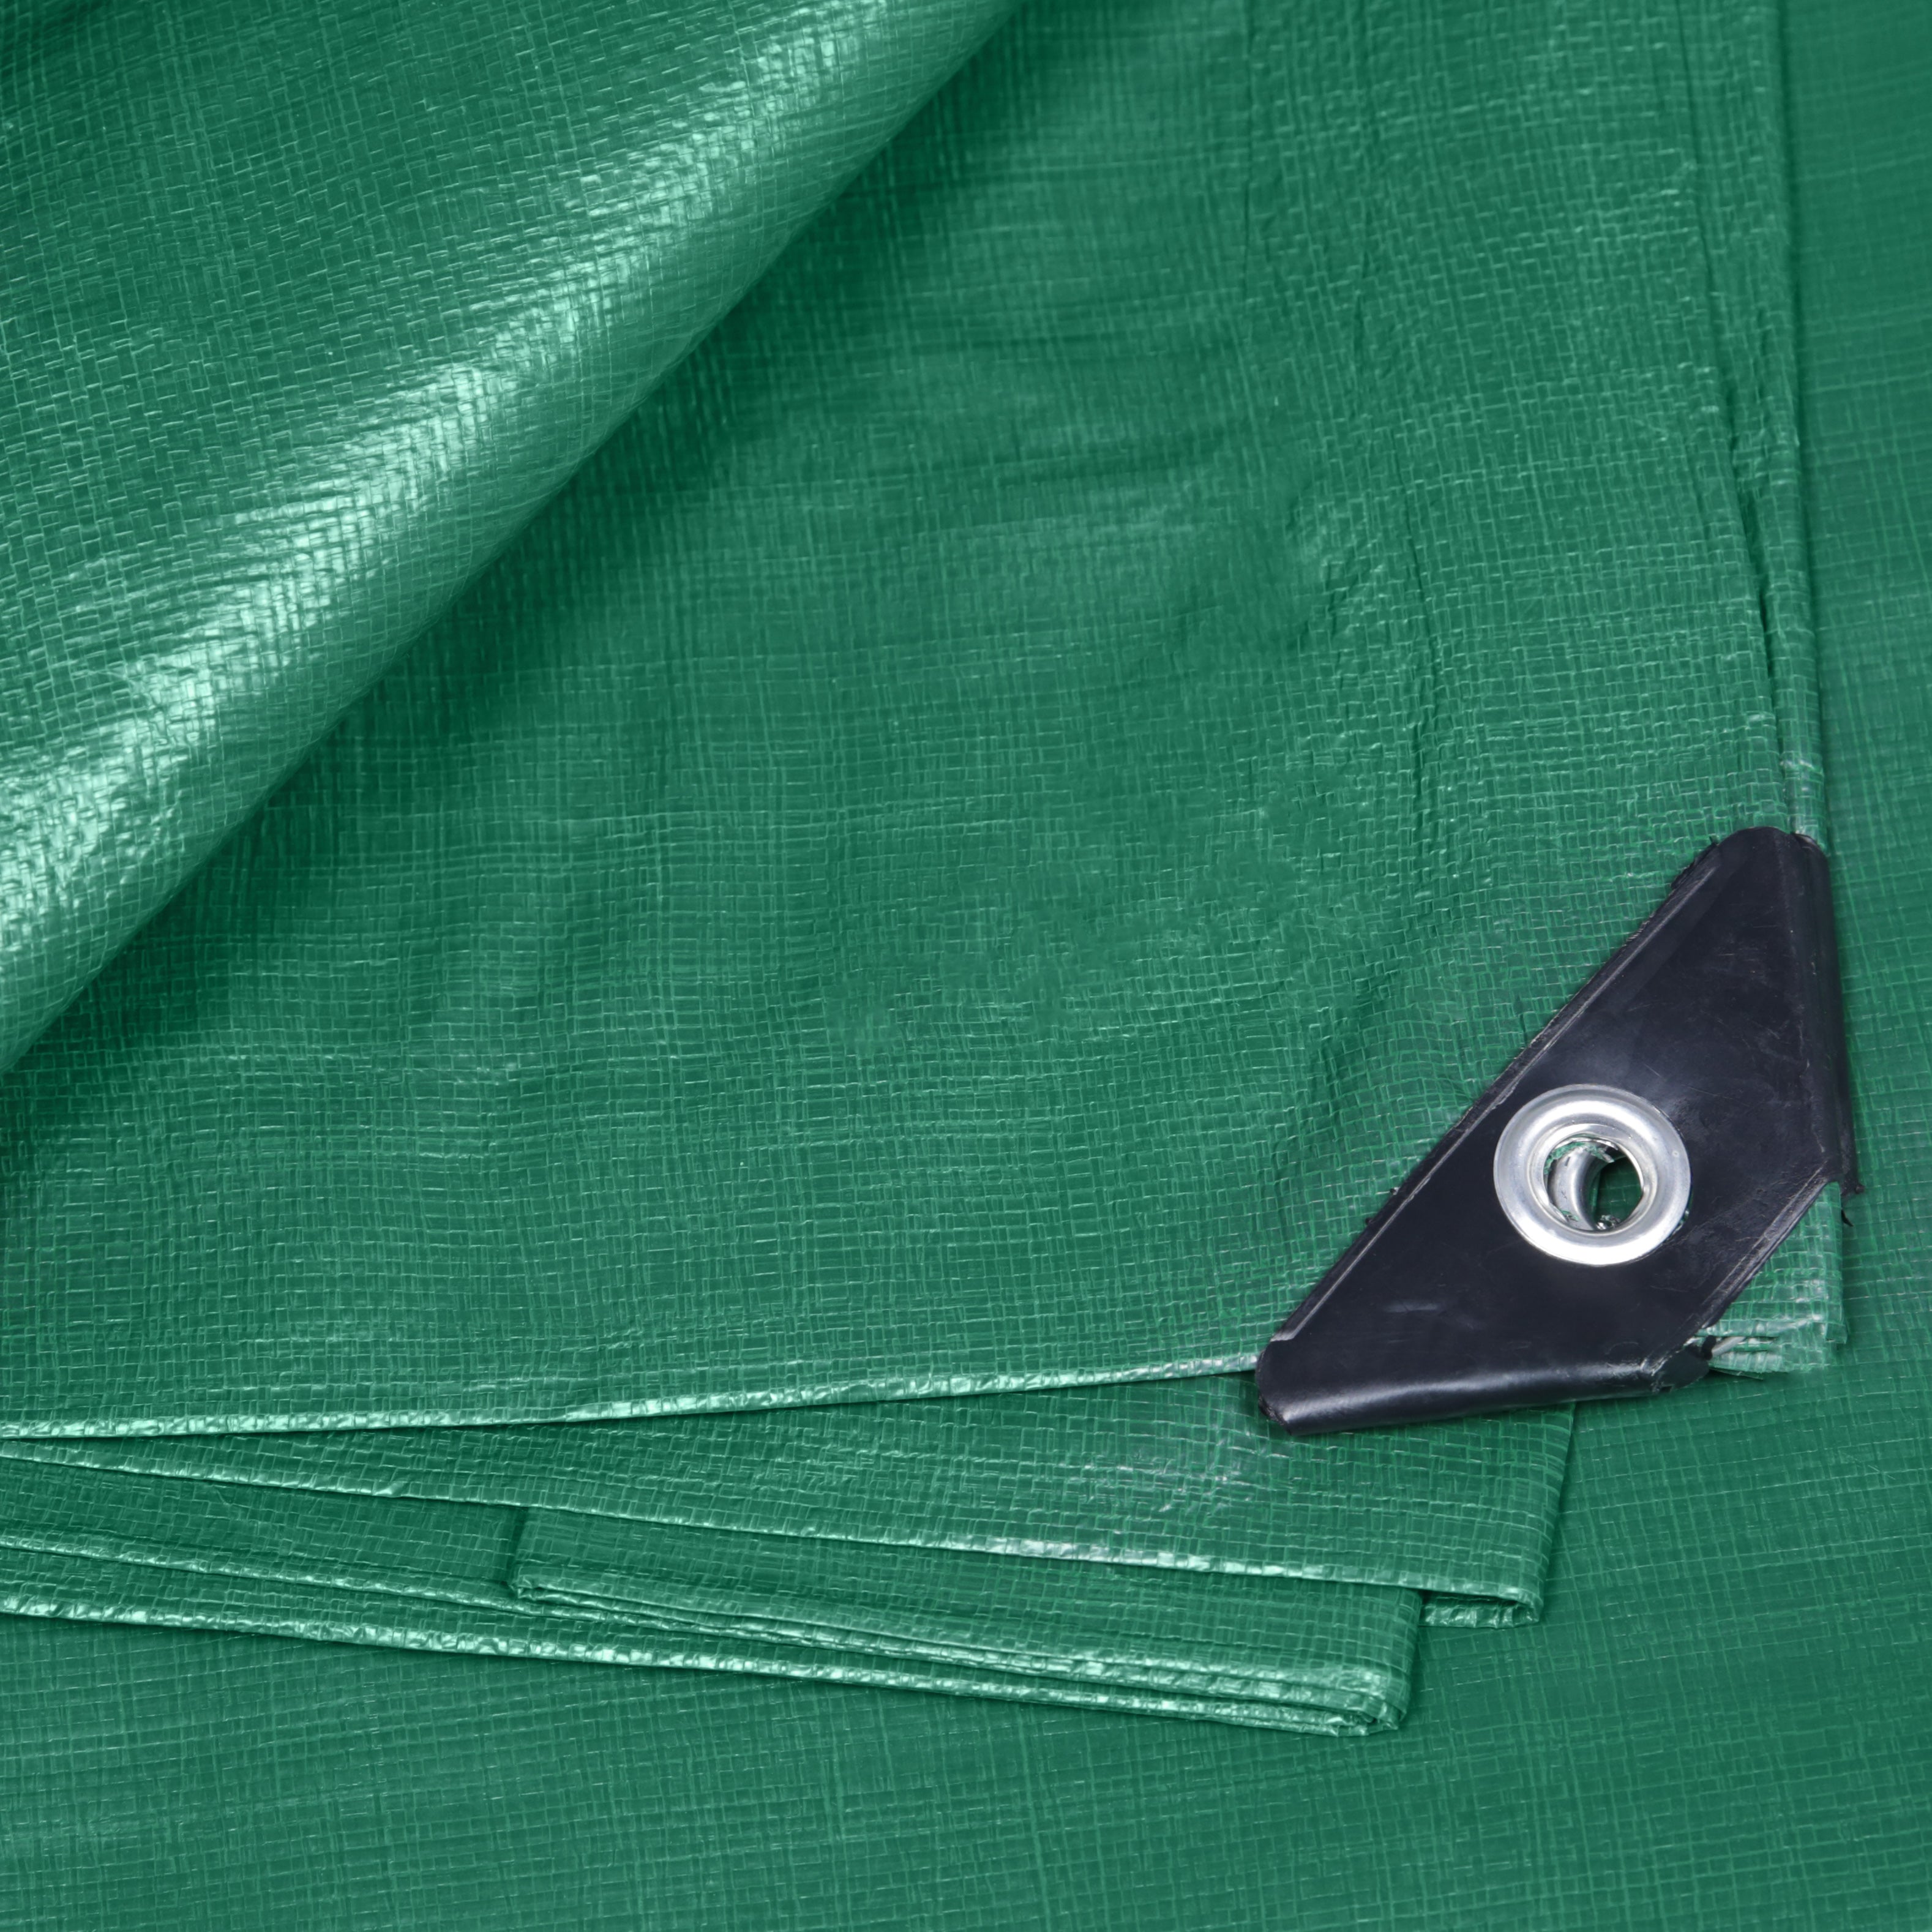 Super Covers Heavy Duty Tarpaulin 175gsm Green/Black - Various Sizes Available